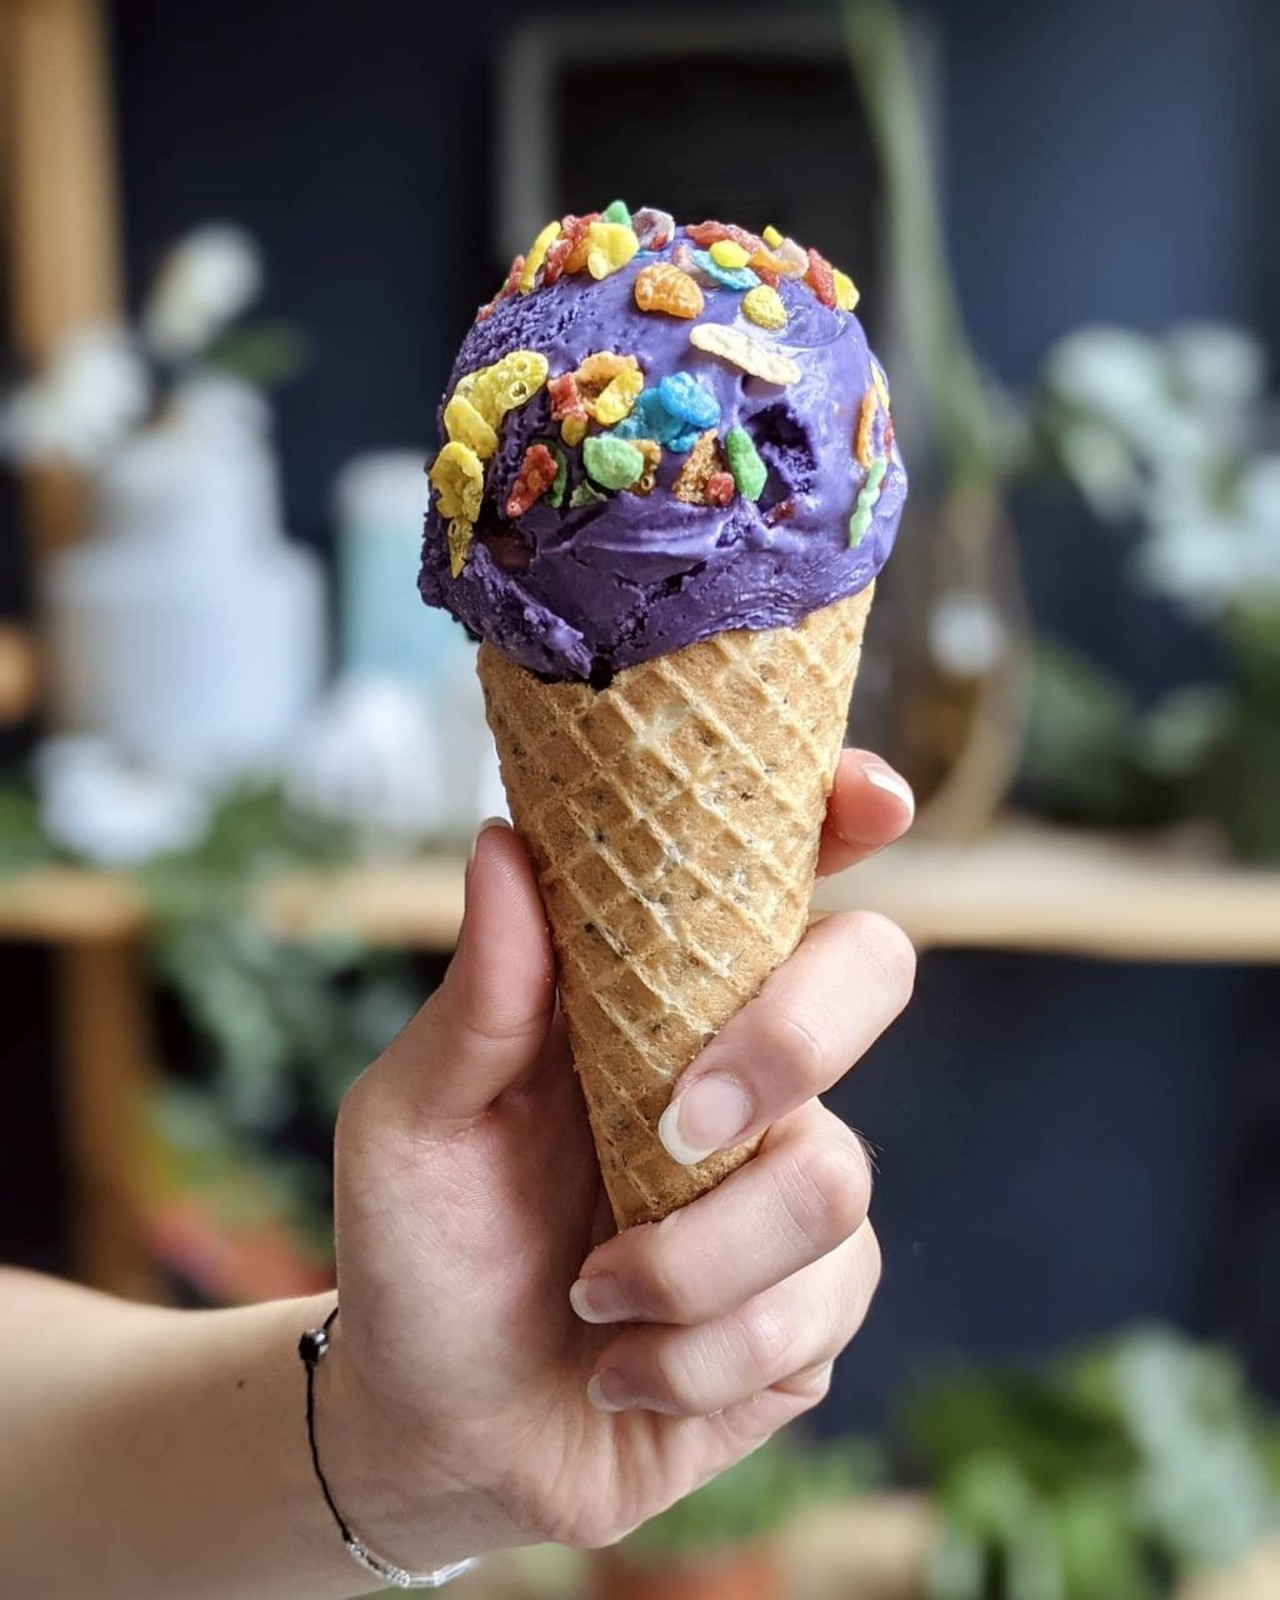 The Greenery Creamery 
420 E. Church St., Orlando
This artisanal ice cream spot offers endless flavors and combinations to satisfy any sweet-tooth cravings, both vegan and not.